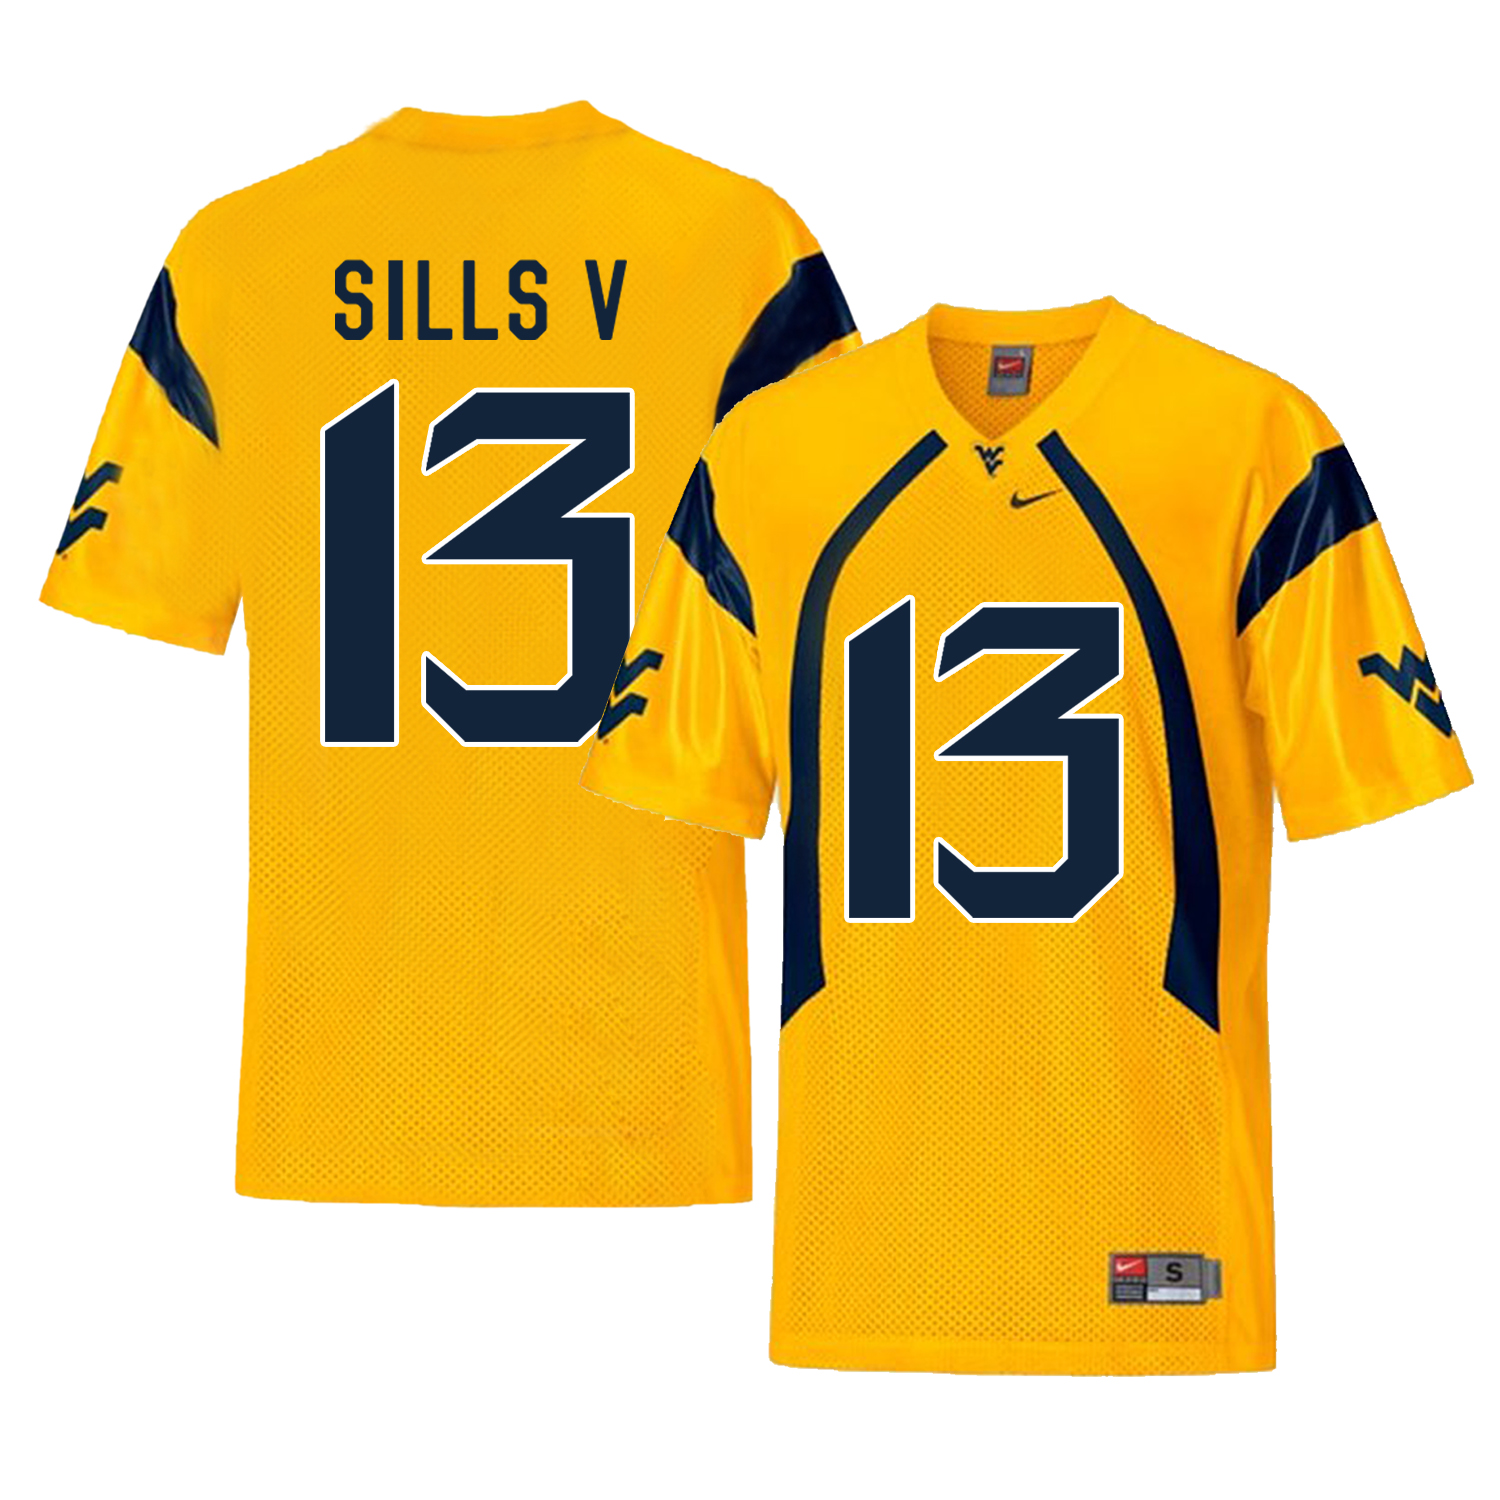 West Virginia Mountaineers 13 David Sills V Gold College Football Jersey